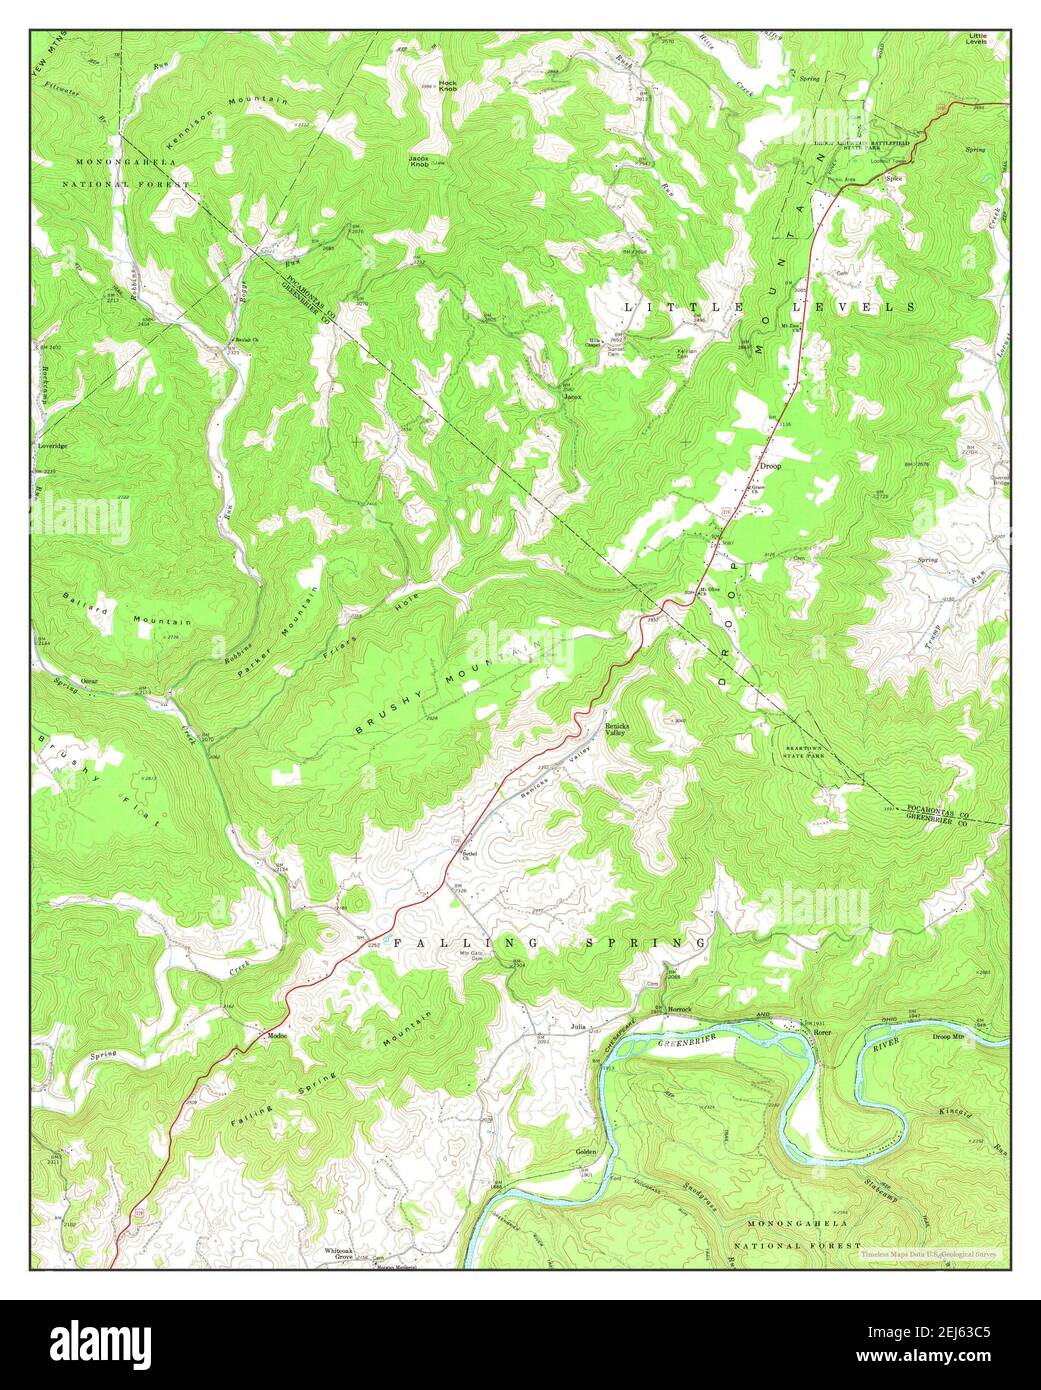 Droop, West Virginia, map 1977, 1:24000, United States of America by Timeless Maps, data U.S. Geological Survey Stock Photo